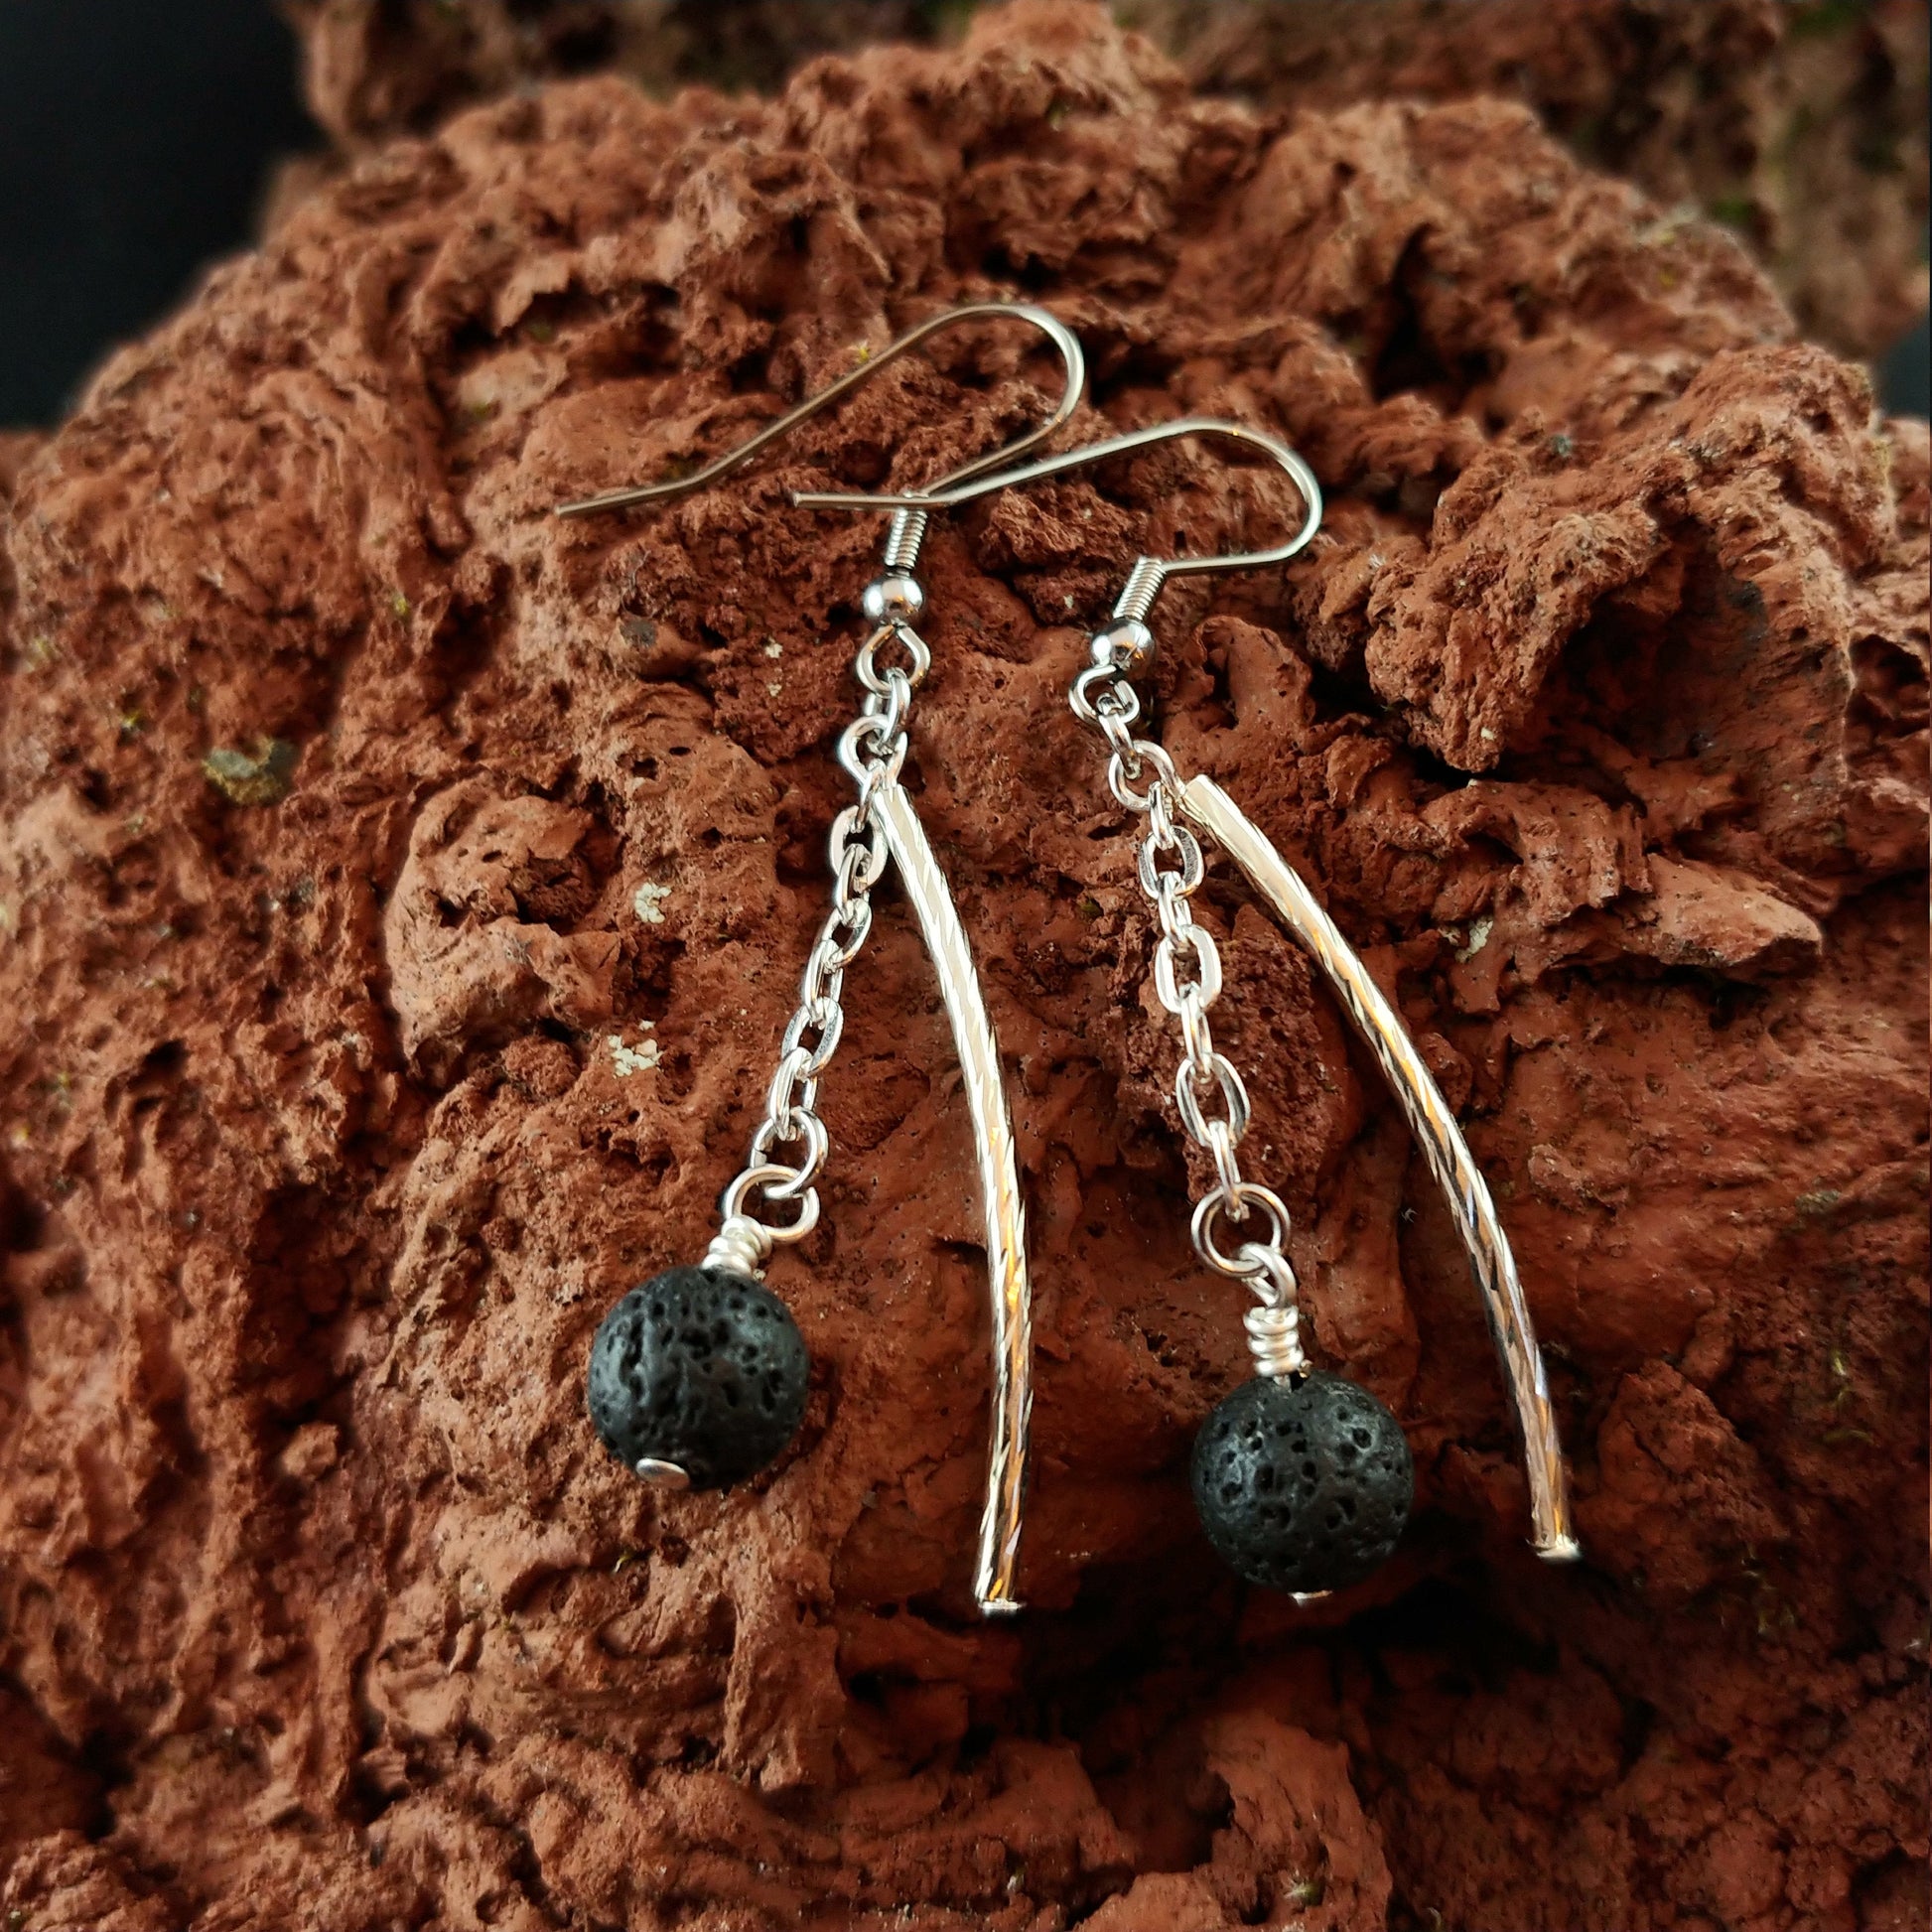 Dangle Lava Earrings with 8mm Lava Rock Beads hanging in a Chain